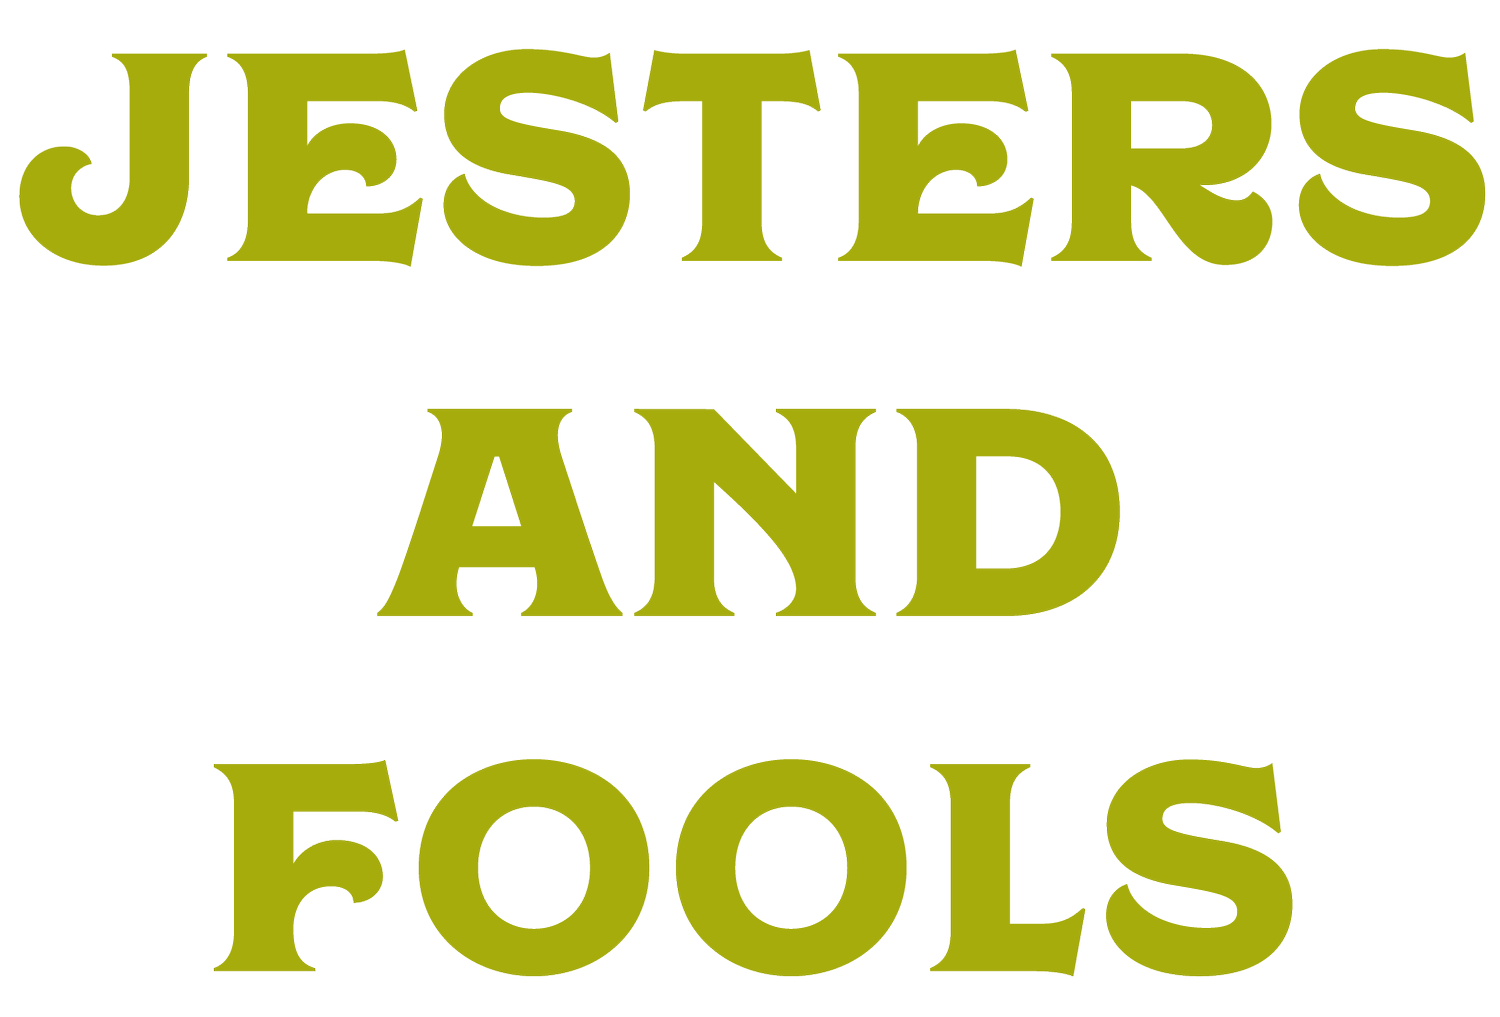 Jesters and Fools